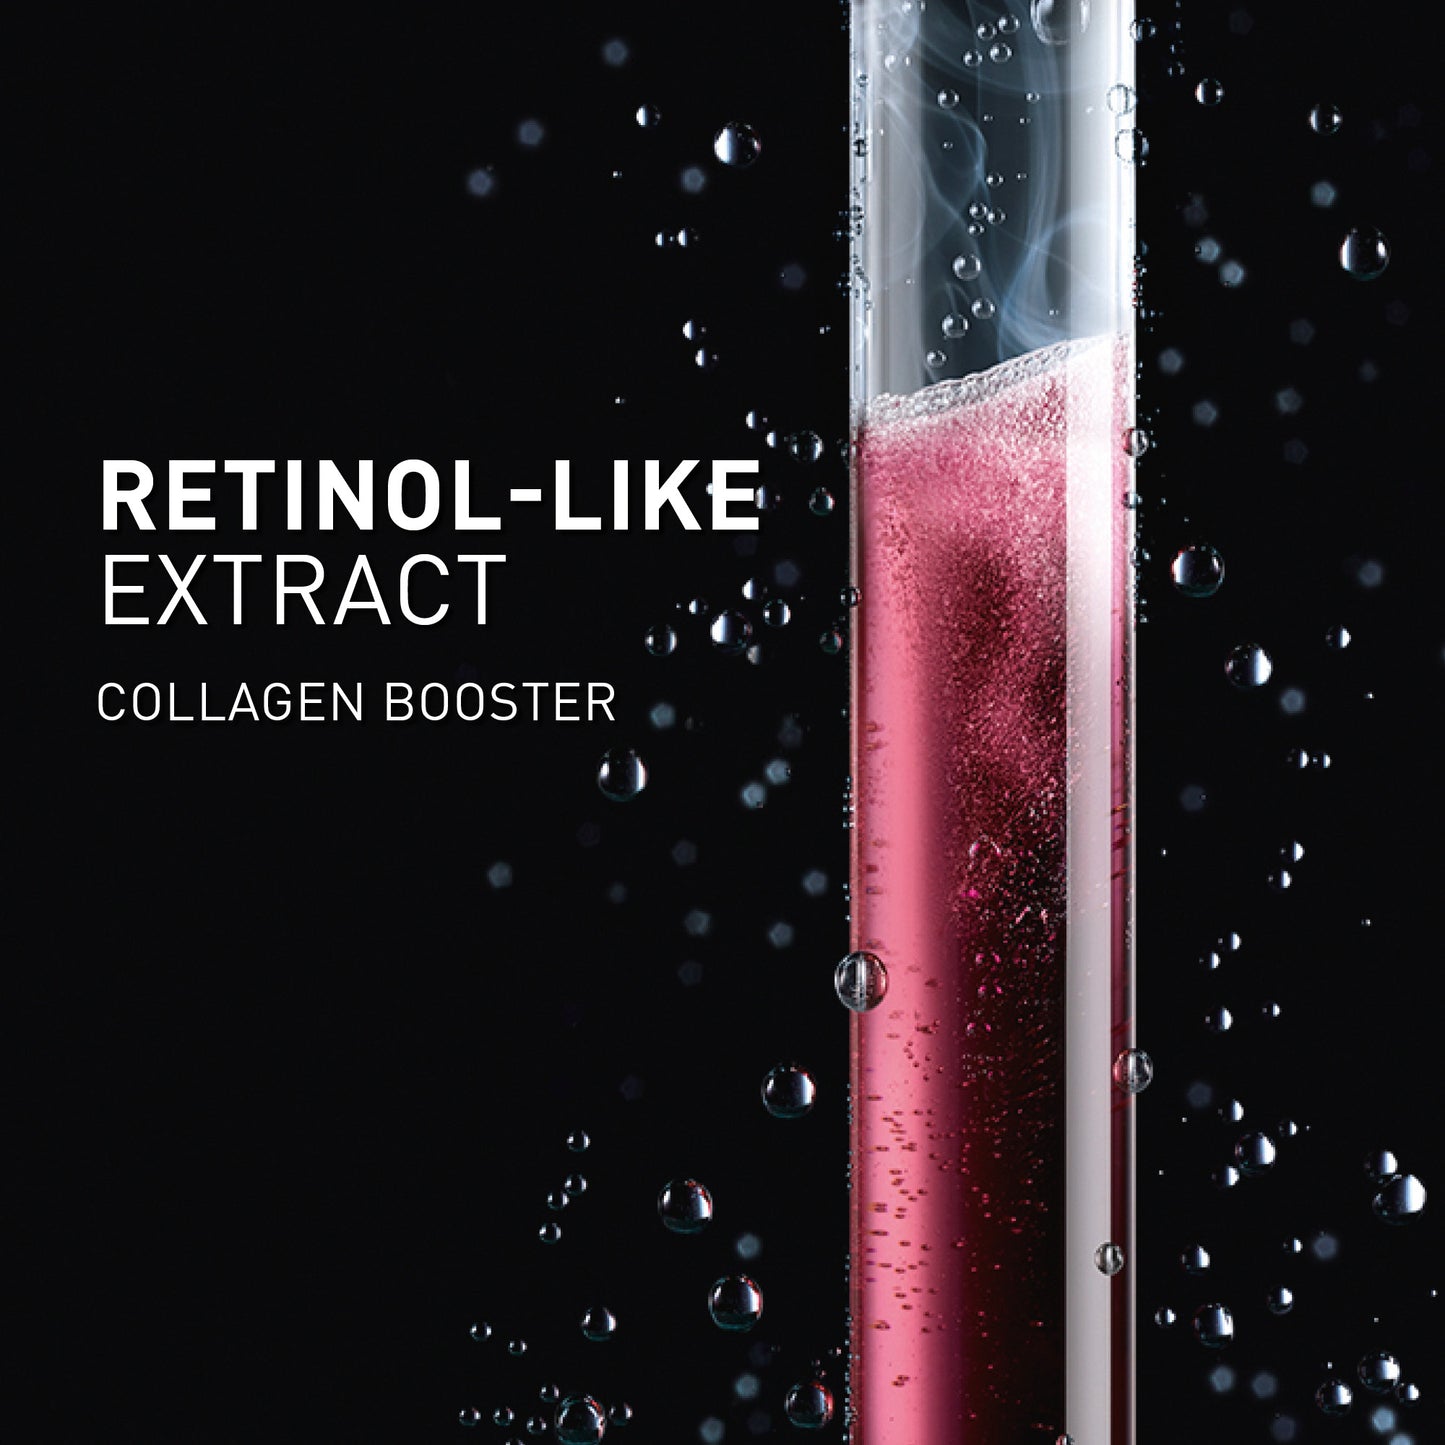 TIME-FILLER ESSENCE contains a Retinol-like extract that is a collagen booster